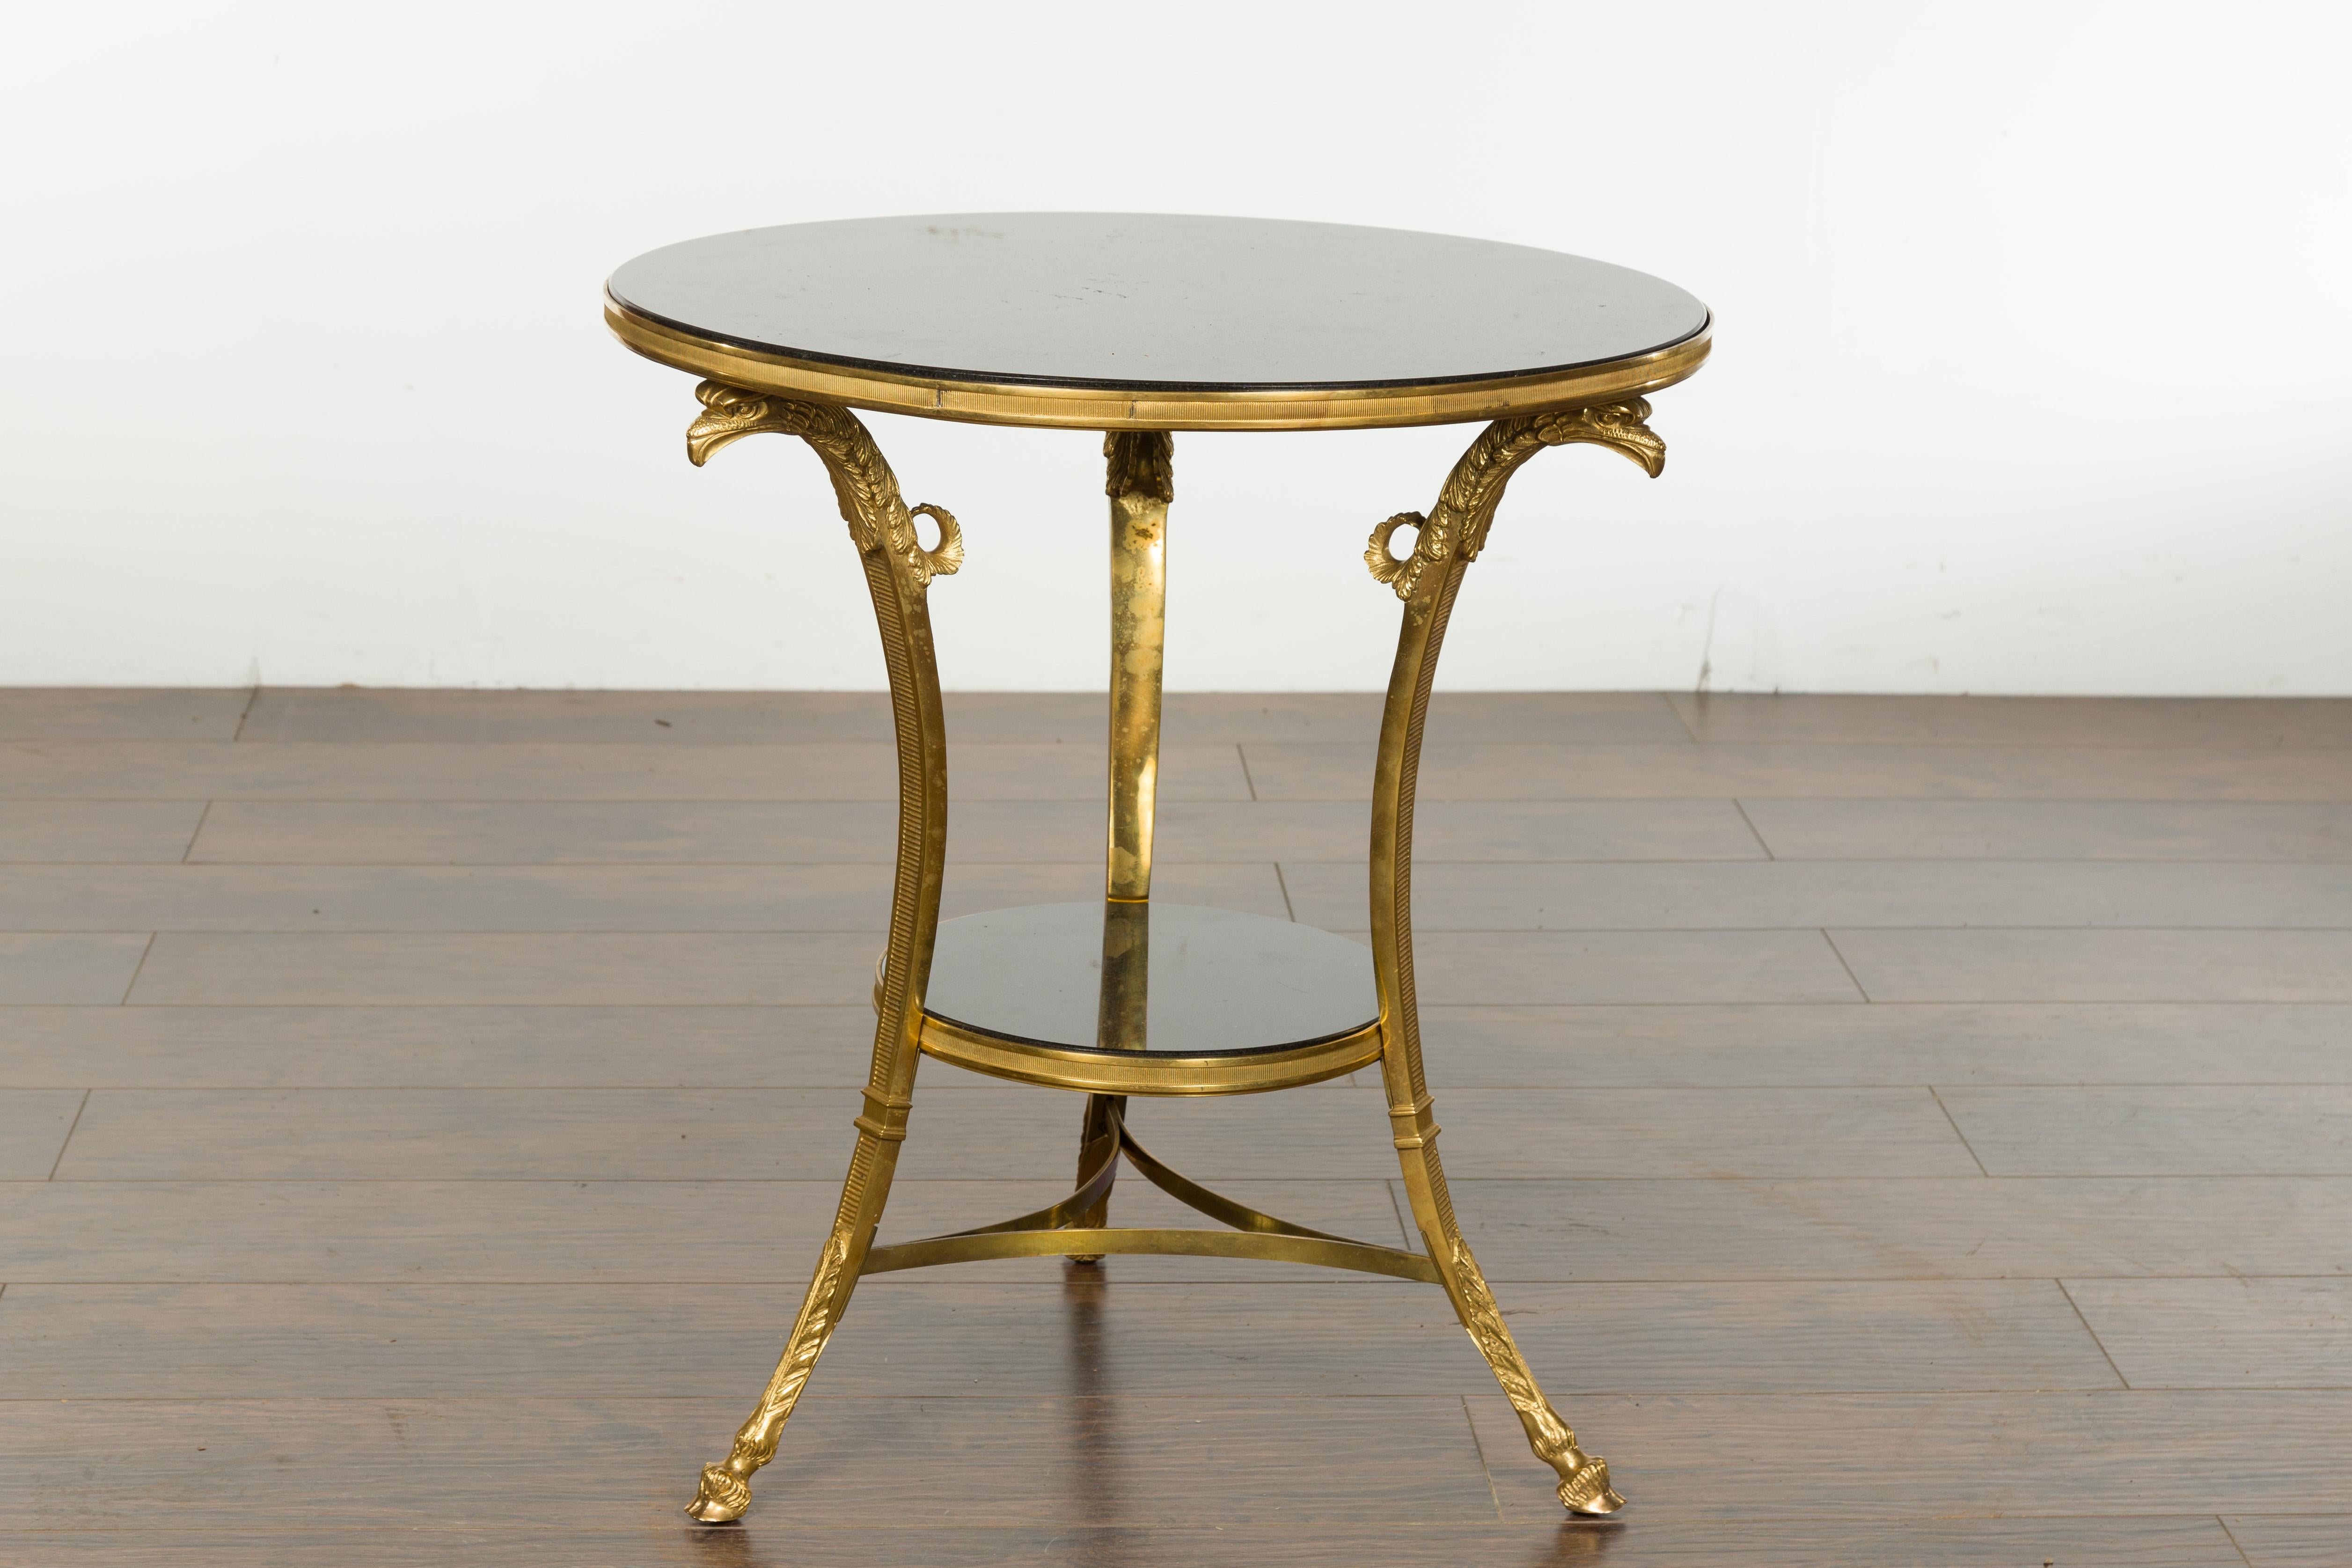 French Napoléon III period gilt bronze table from the mid-19th century, with black marble top and shelf and eagle heads. Created in France during the reign of Emperor Napoléon III's reign, this gilt bronze side table features a circular black marble